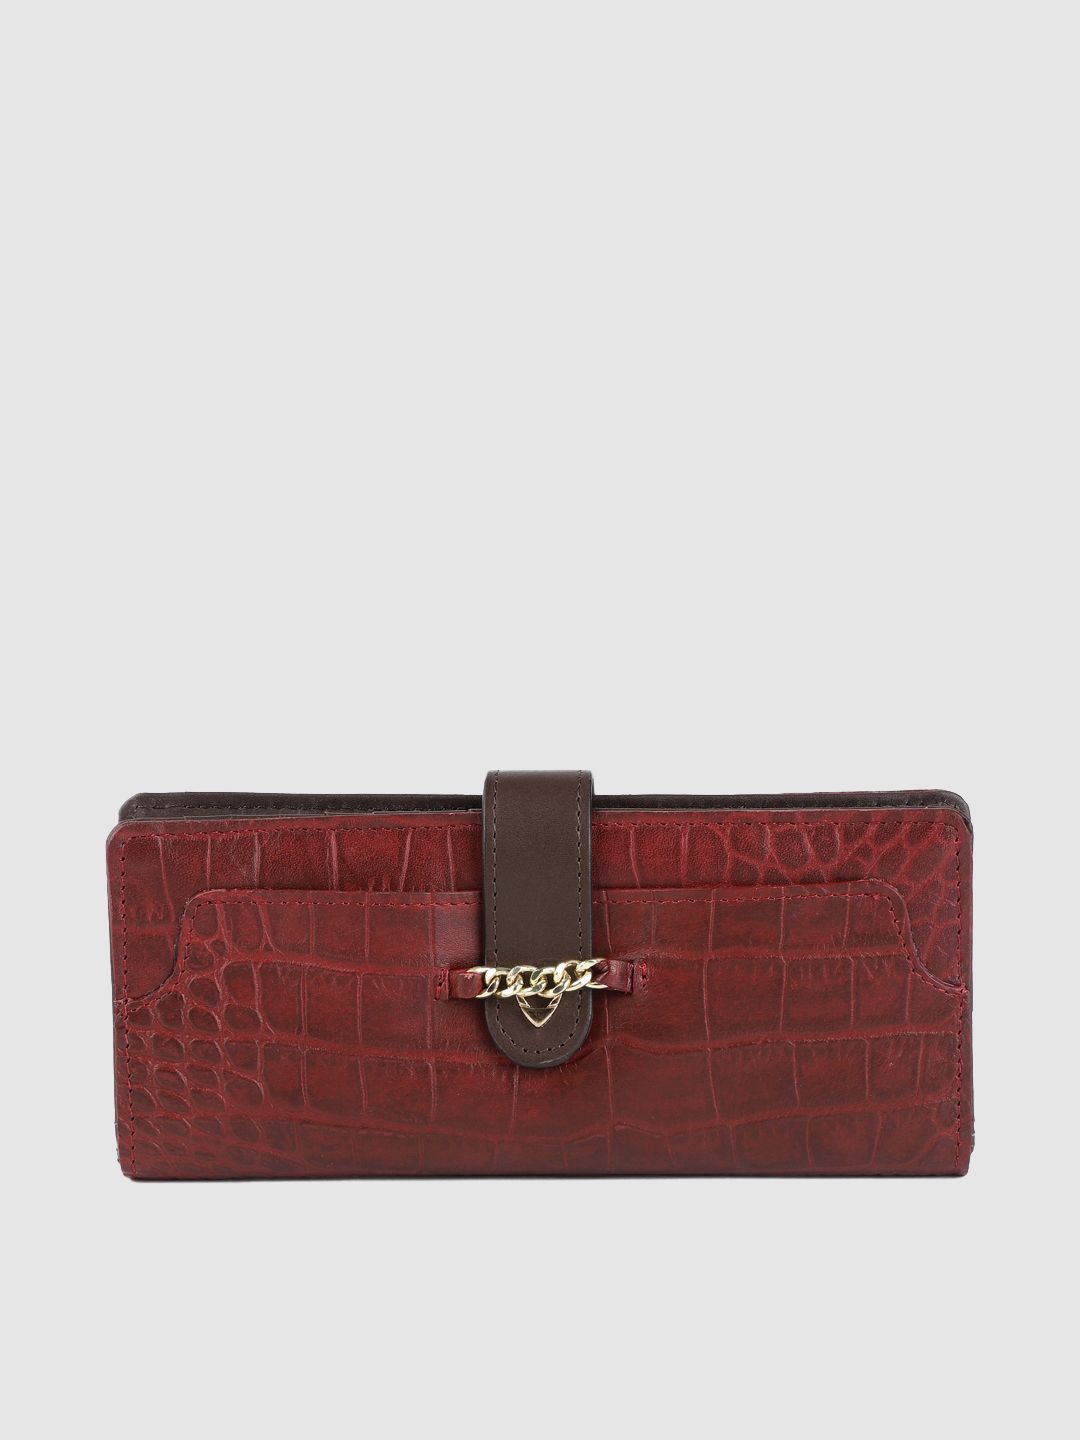 Hidesign Women Maroon Croco Textured Leather Two Fold Wallet Price in India